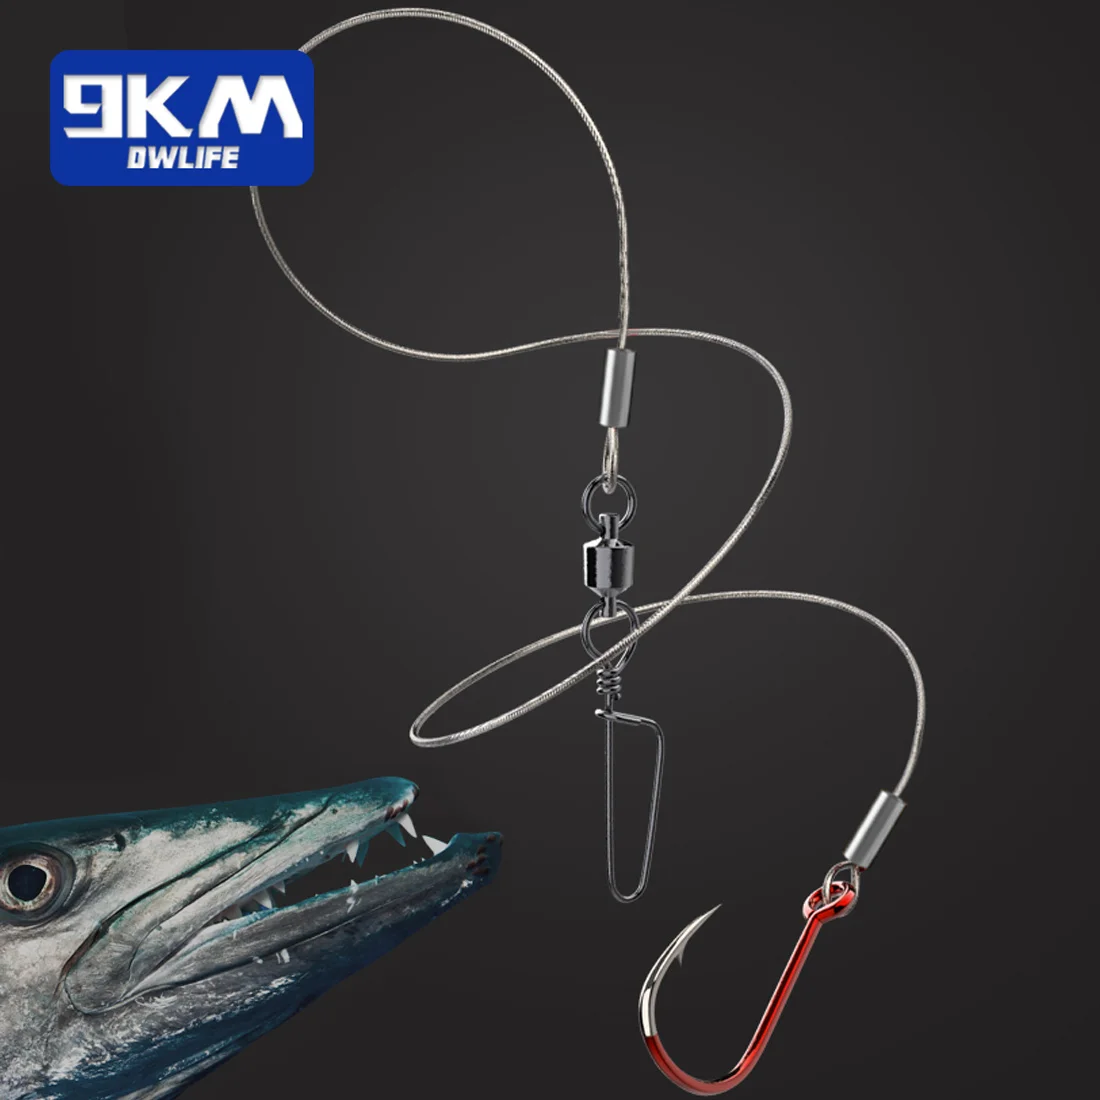 9KM 7 Strands Fishing Wire Stainless Steel Wire 10M Trolling Wire